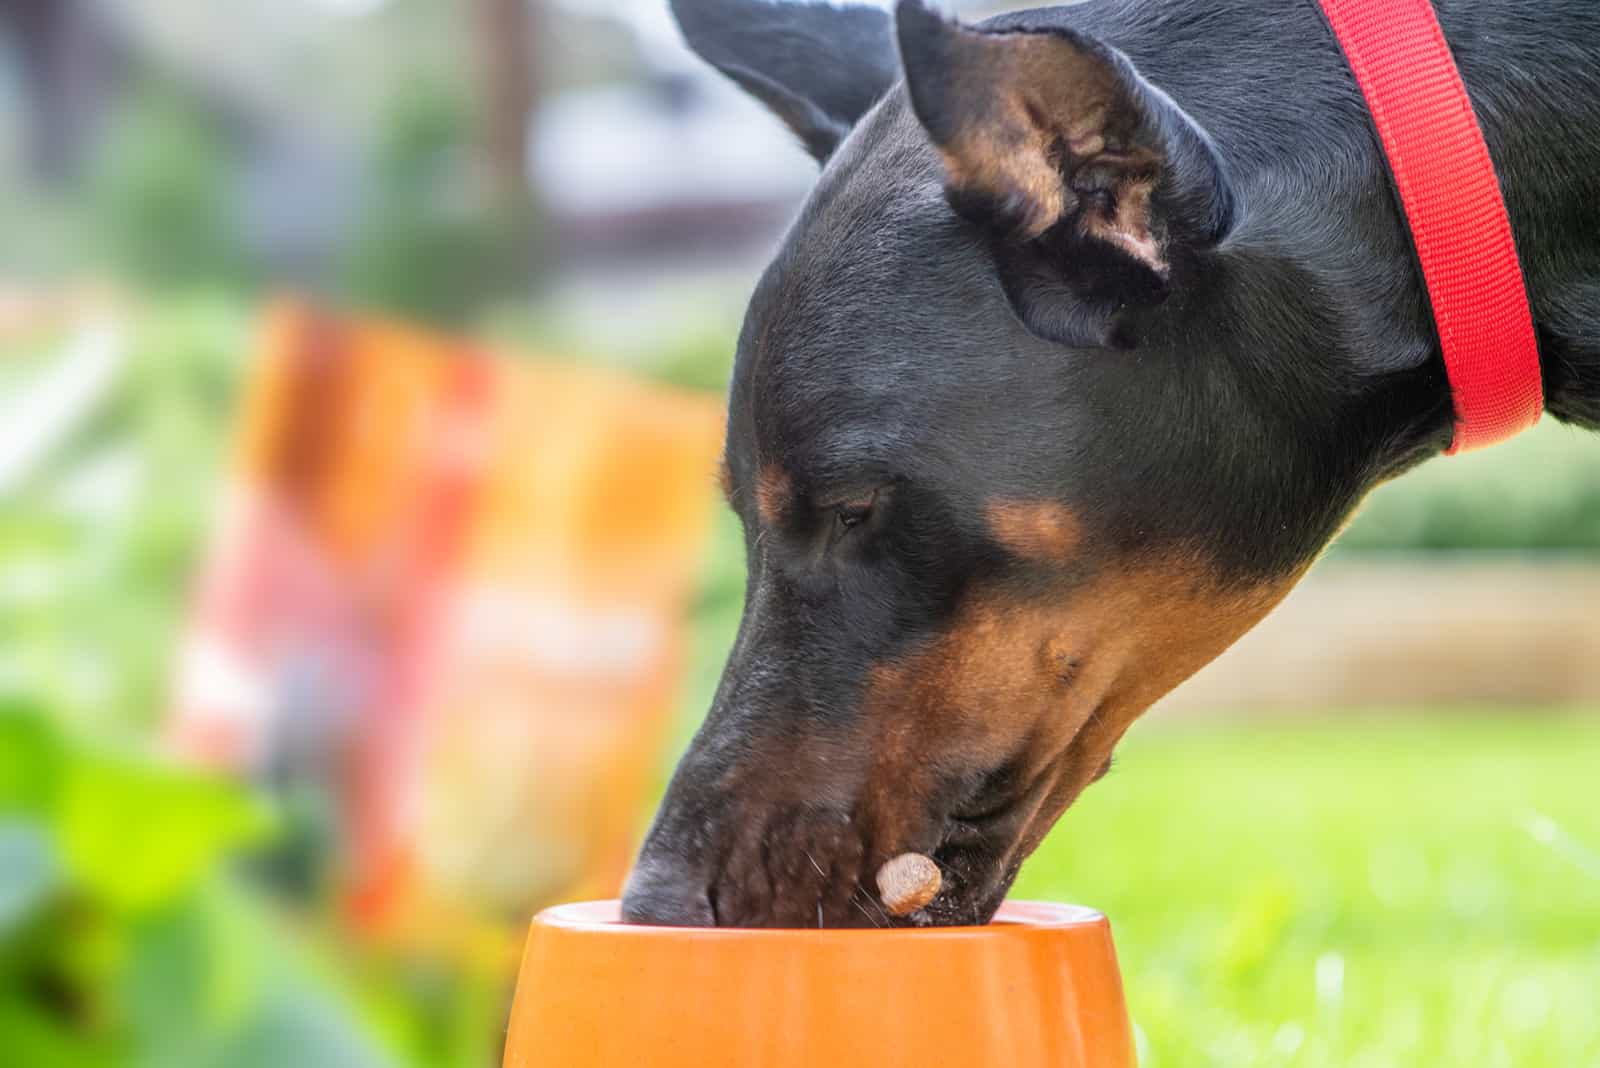 the doberman eats from a bowl